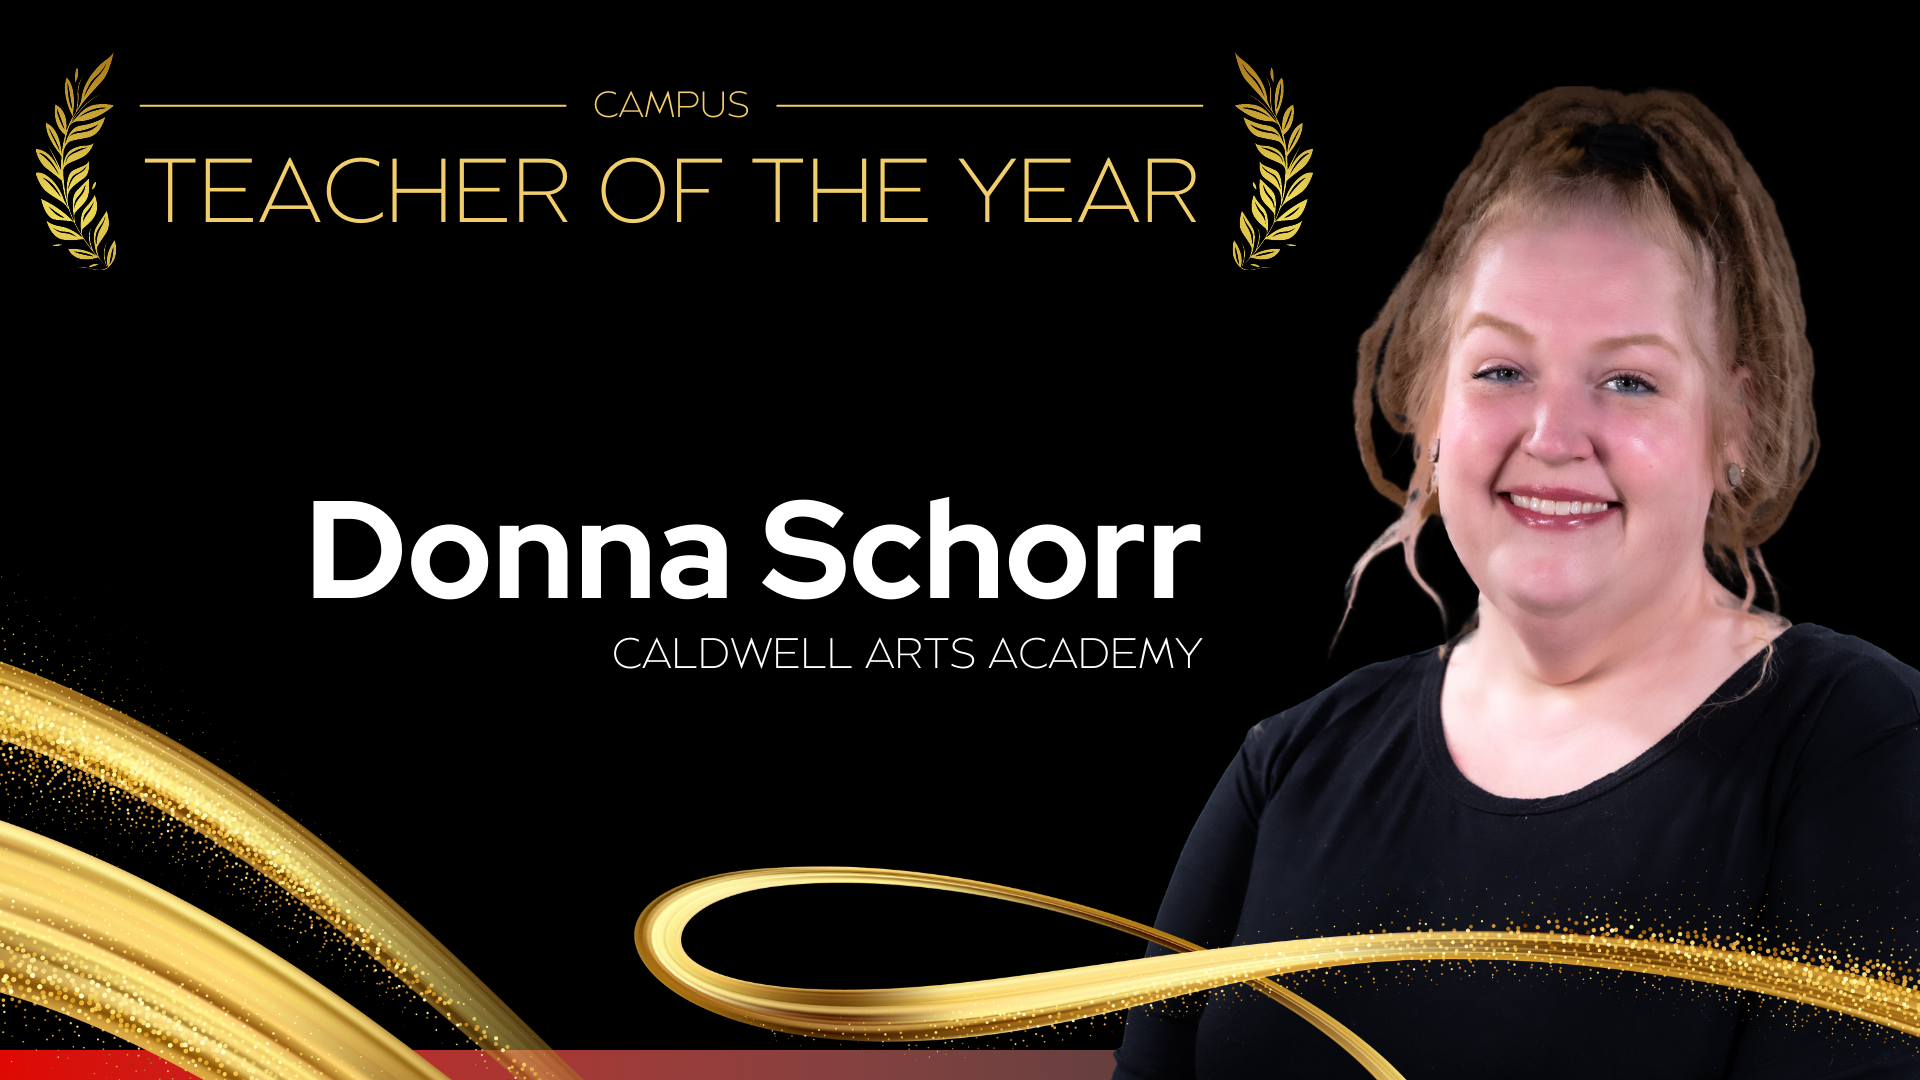 Campus Teacher of the Year Caldwell Arts Academy, Secondary - Donna Schorr 